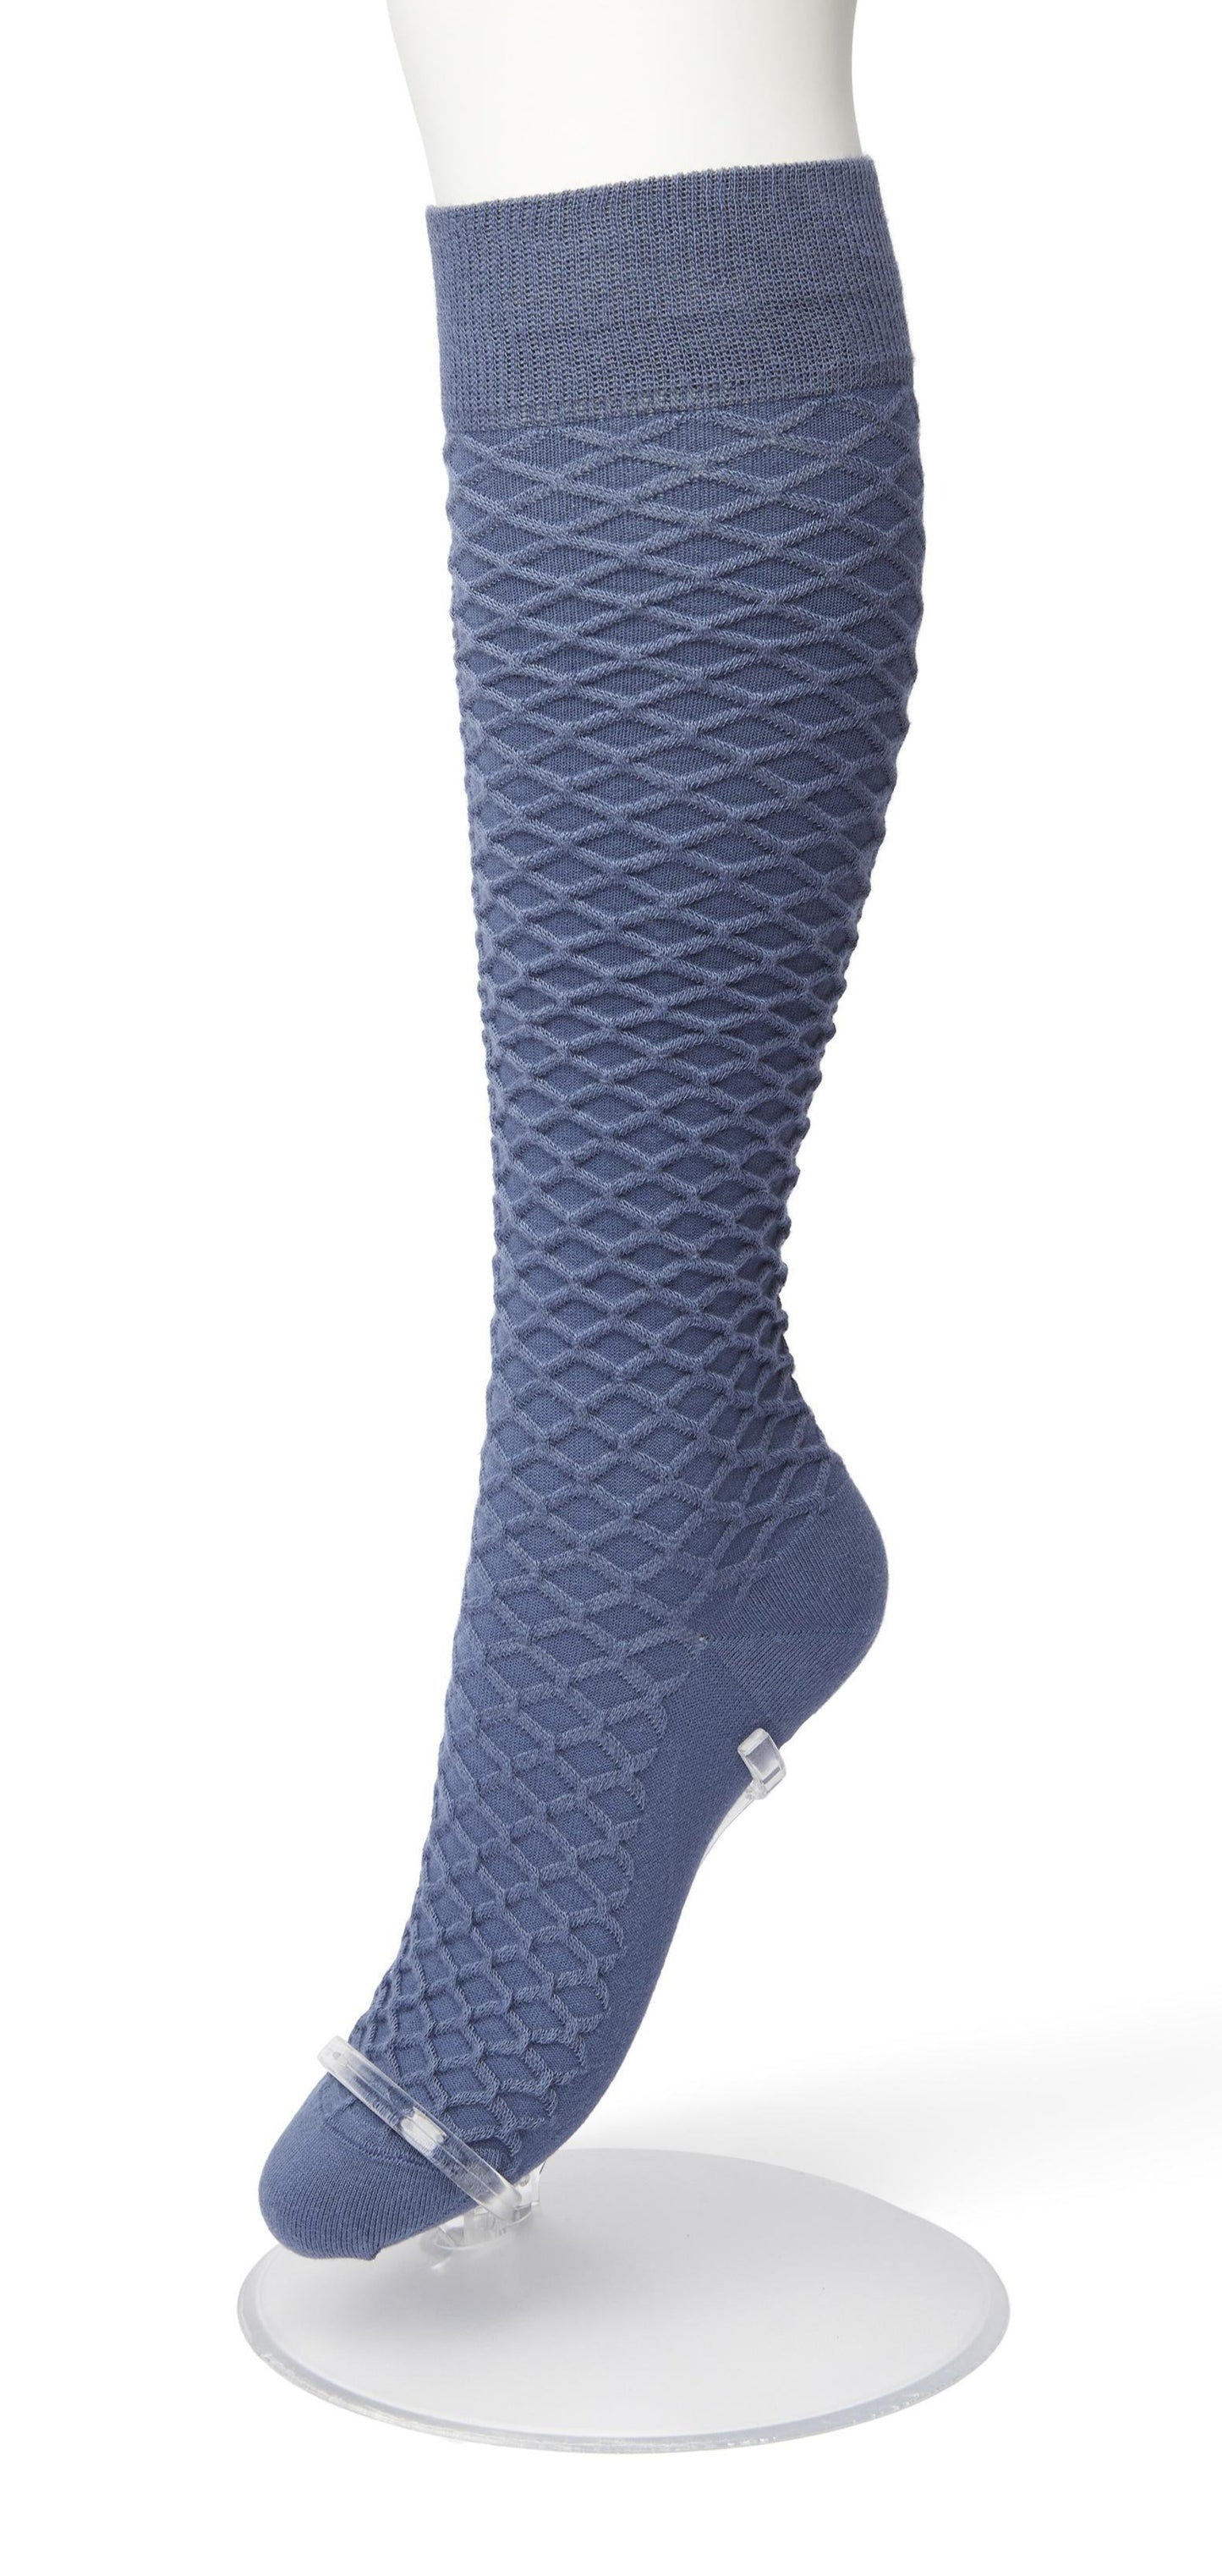 Bonnie Doon BP211506 Cable Knee-highs - Denim Blue (bering sea) soft and warm knitted knee-high socks with a criss-cross diamond textured pattern